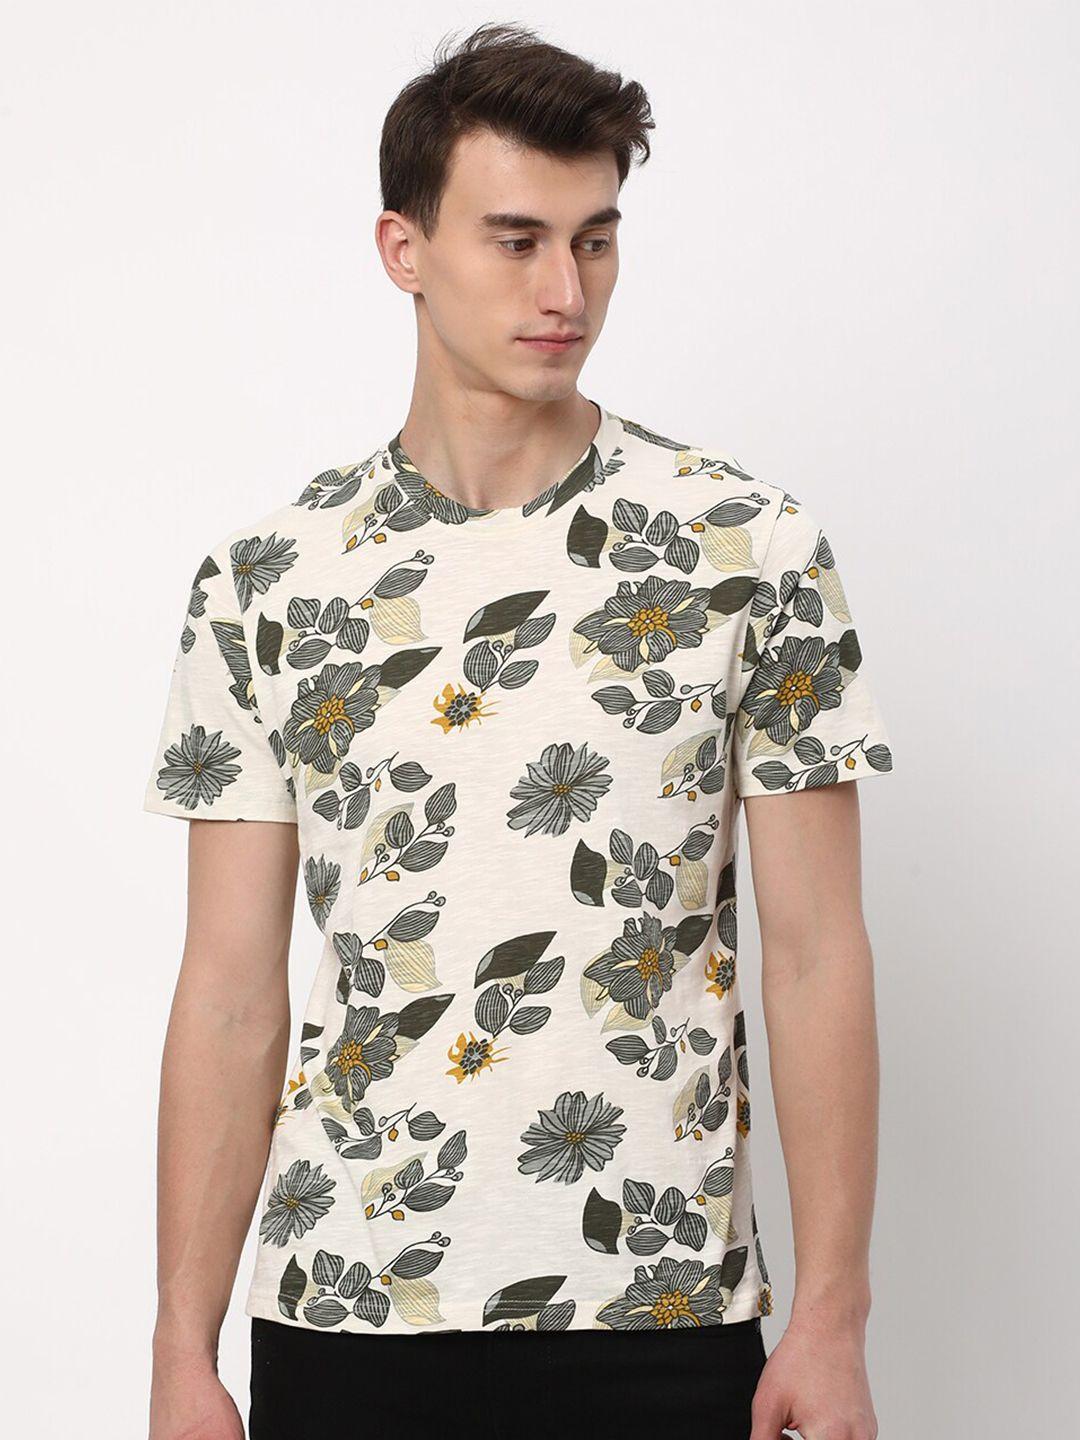 r&b floral printed round neck cotton t-shirt